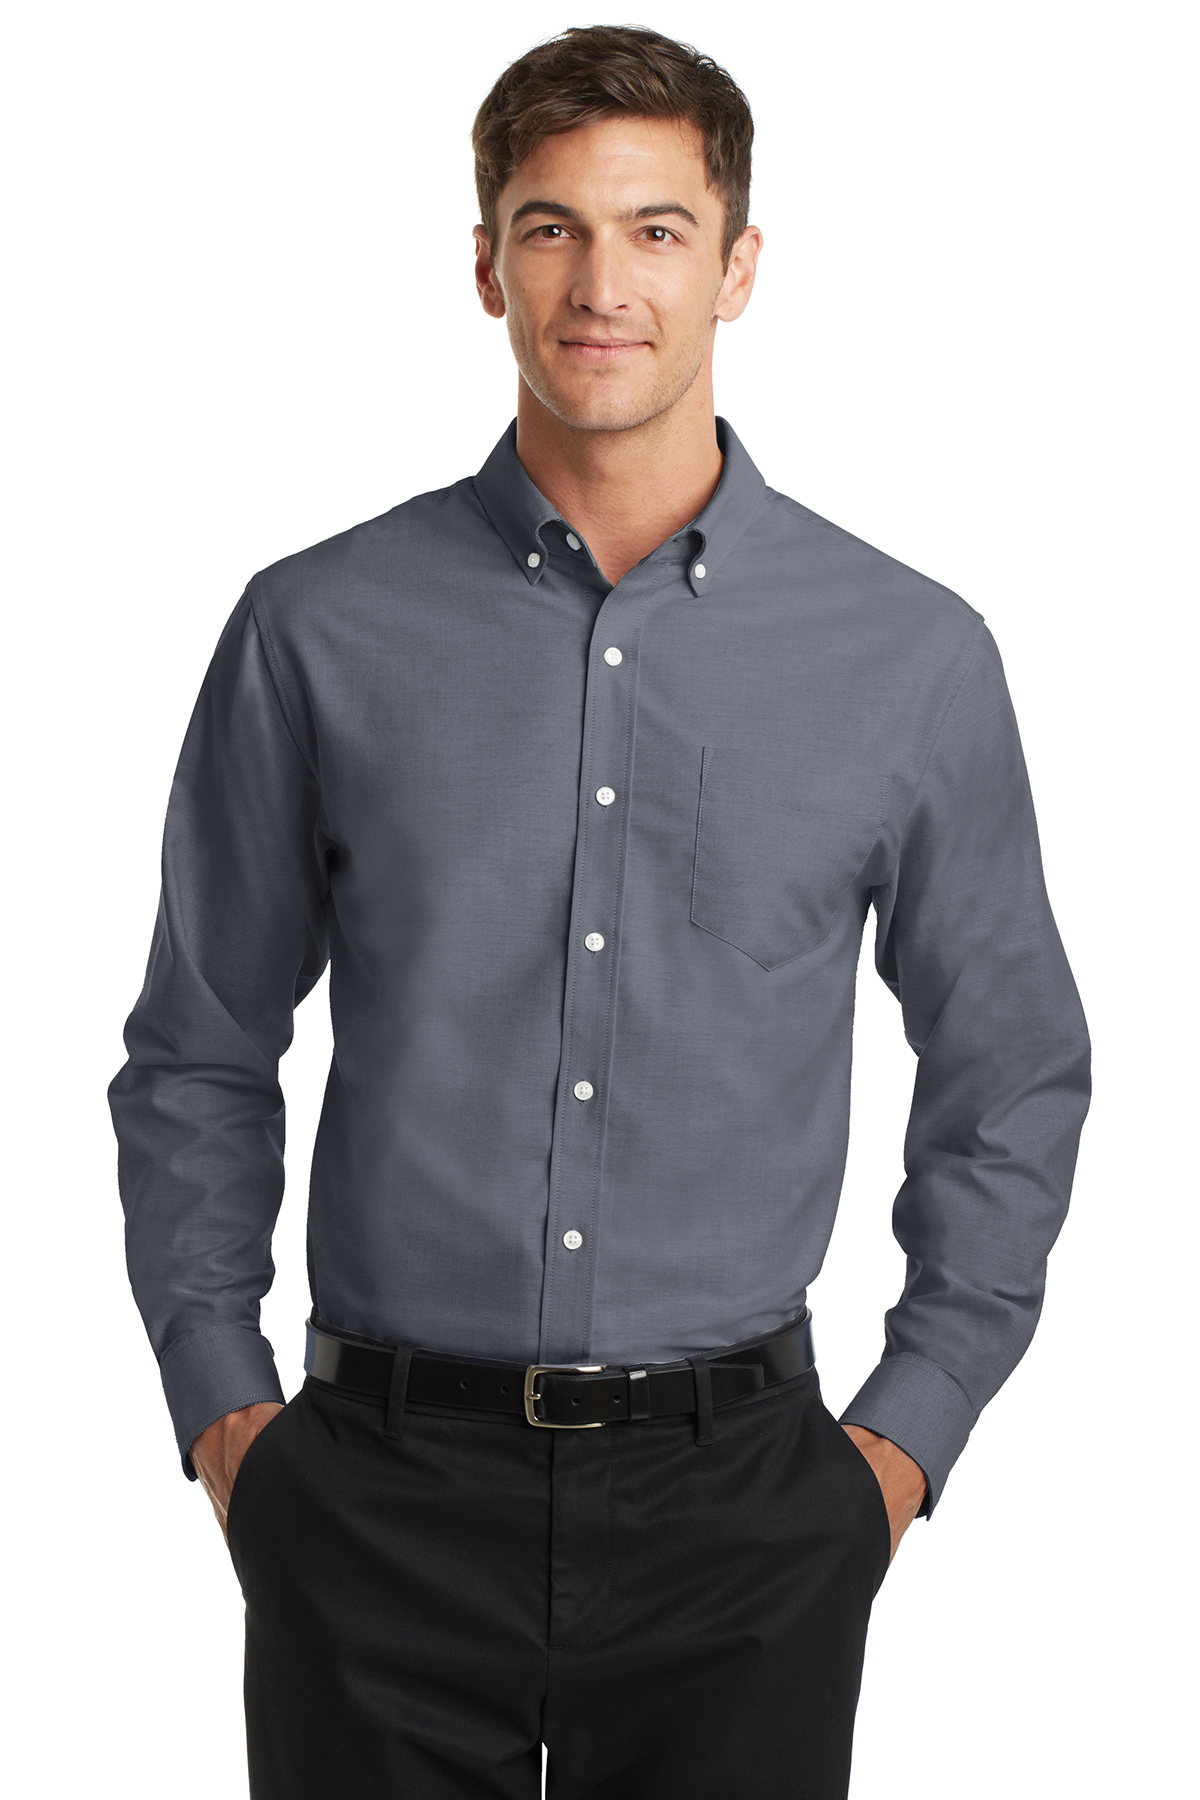 Port Authority Tall SuperPro™ Oxford Shirt | Product | Port Authority